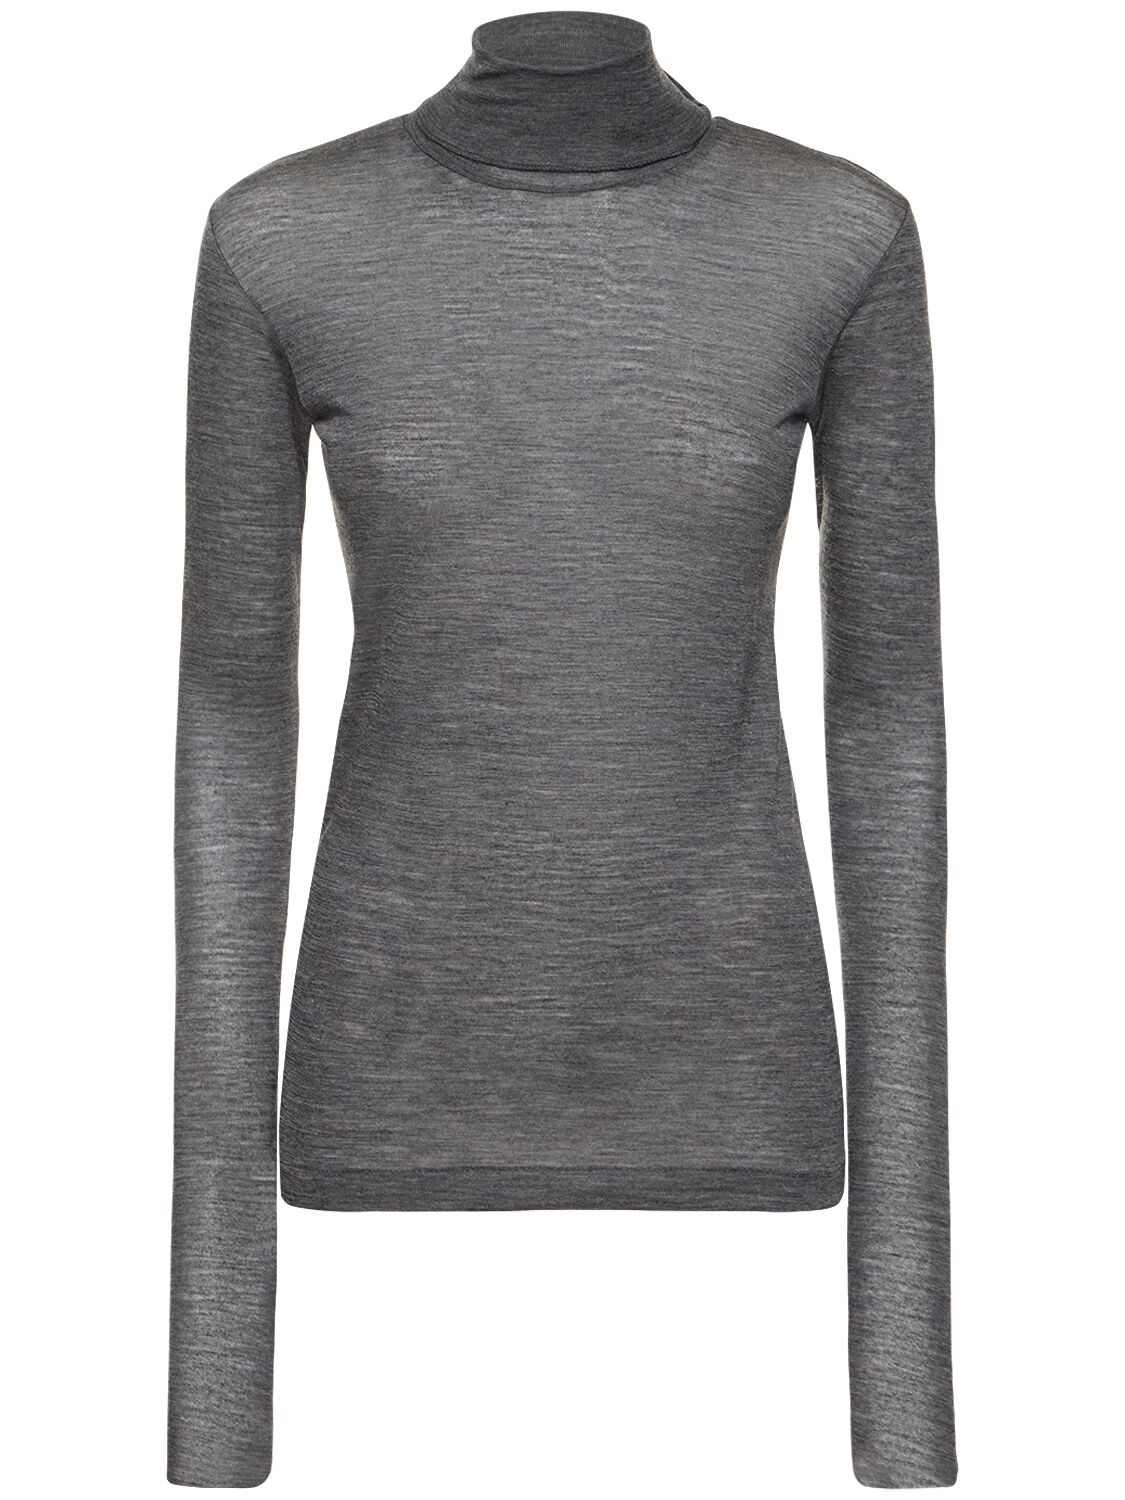 Image of Super Soft Sheer Wool Jersey Top